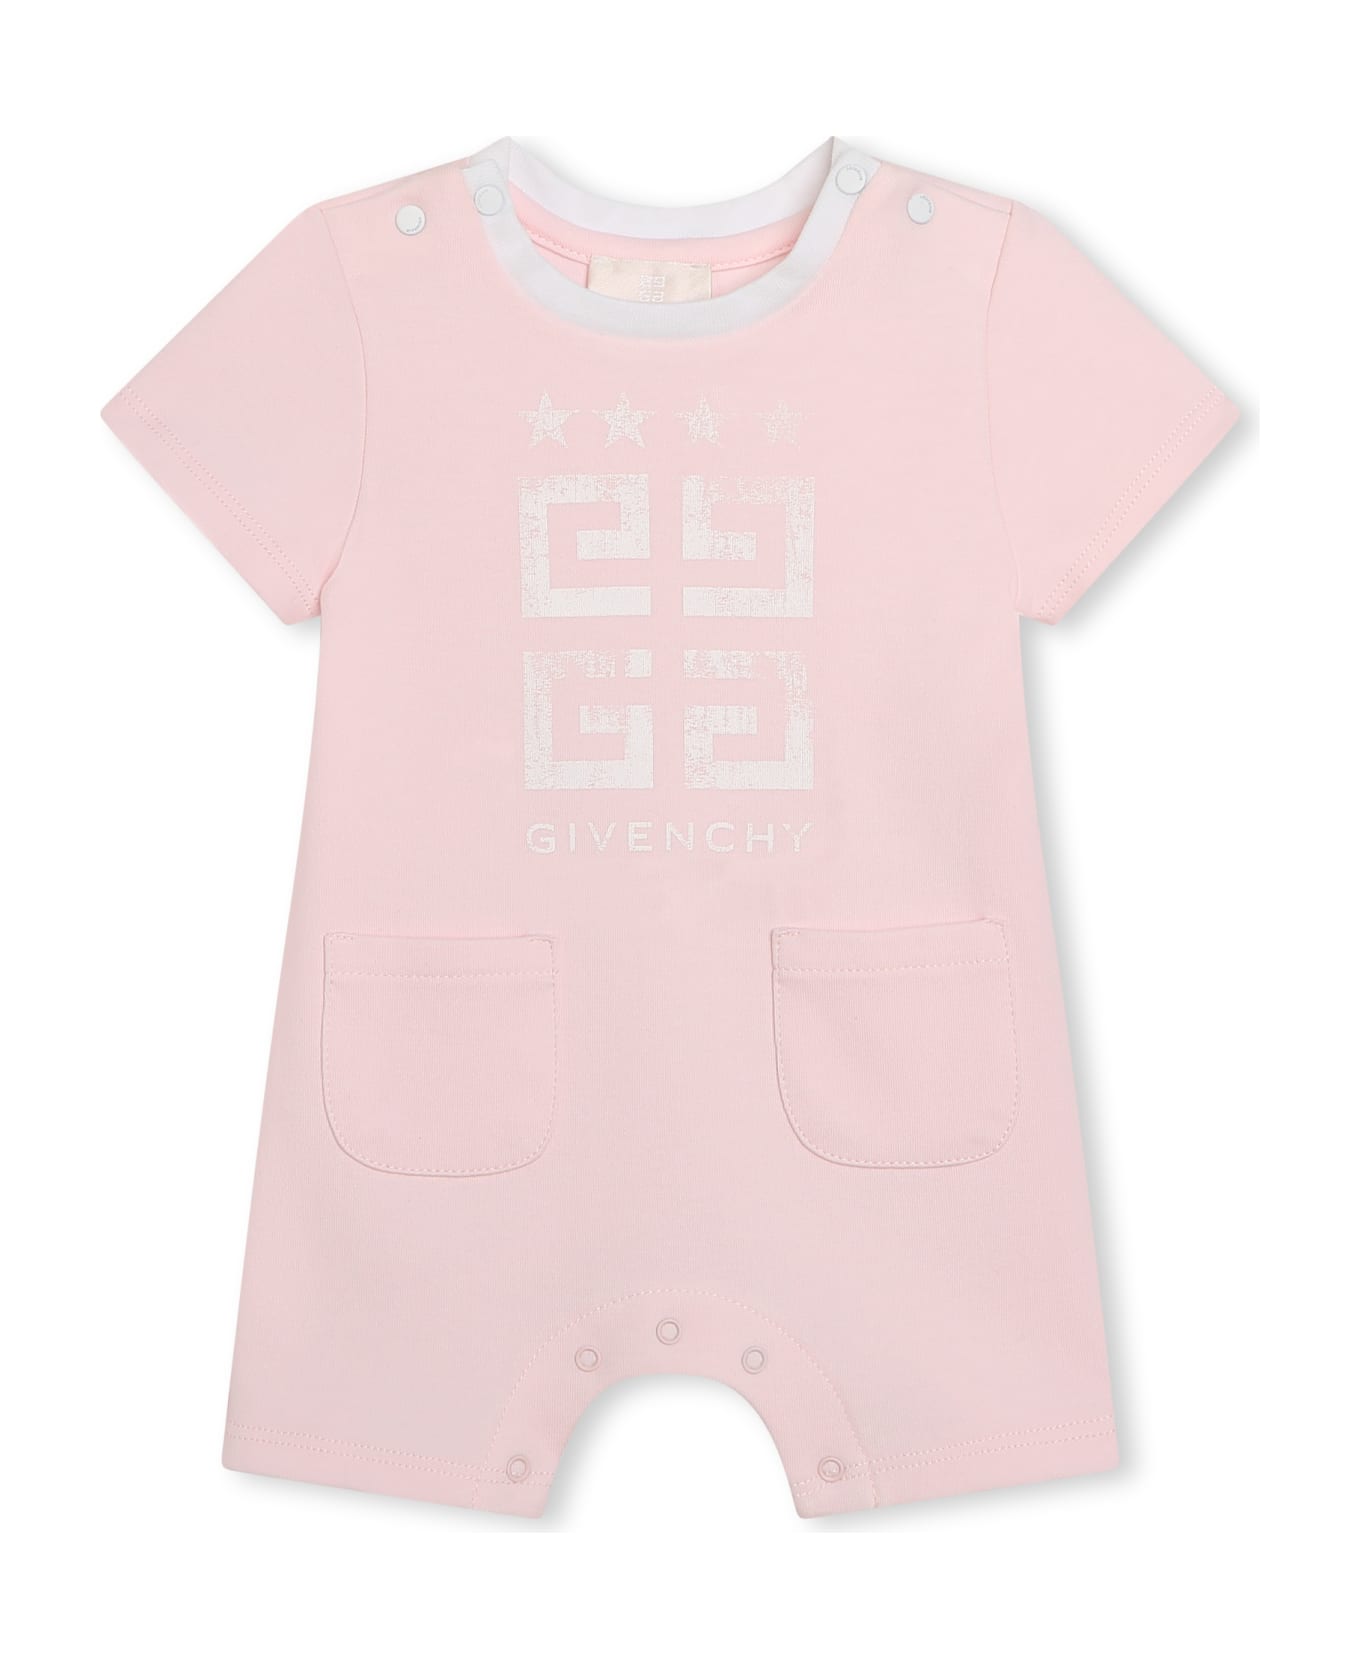 Givenchy hats Printed Romper - Pink